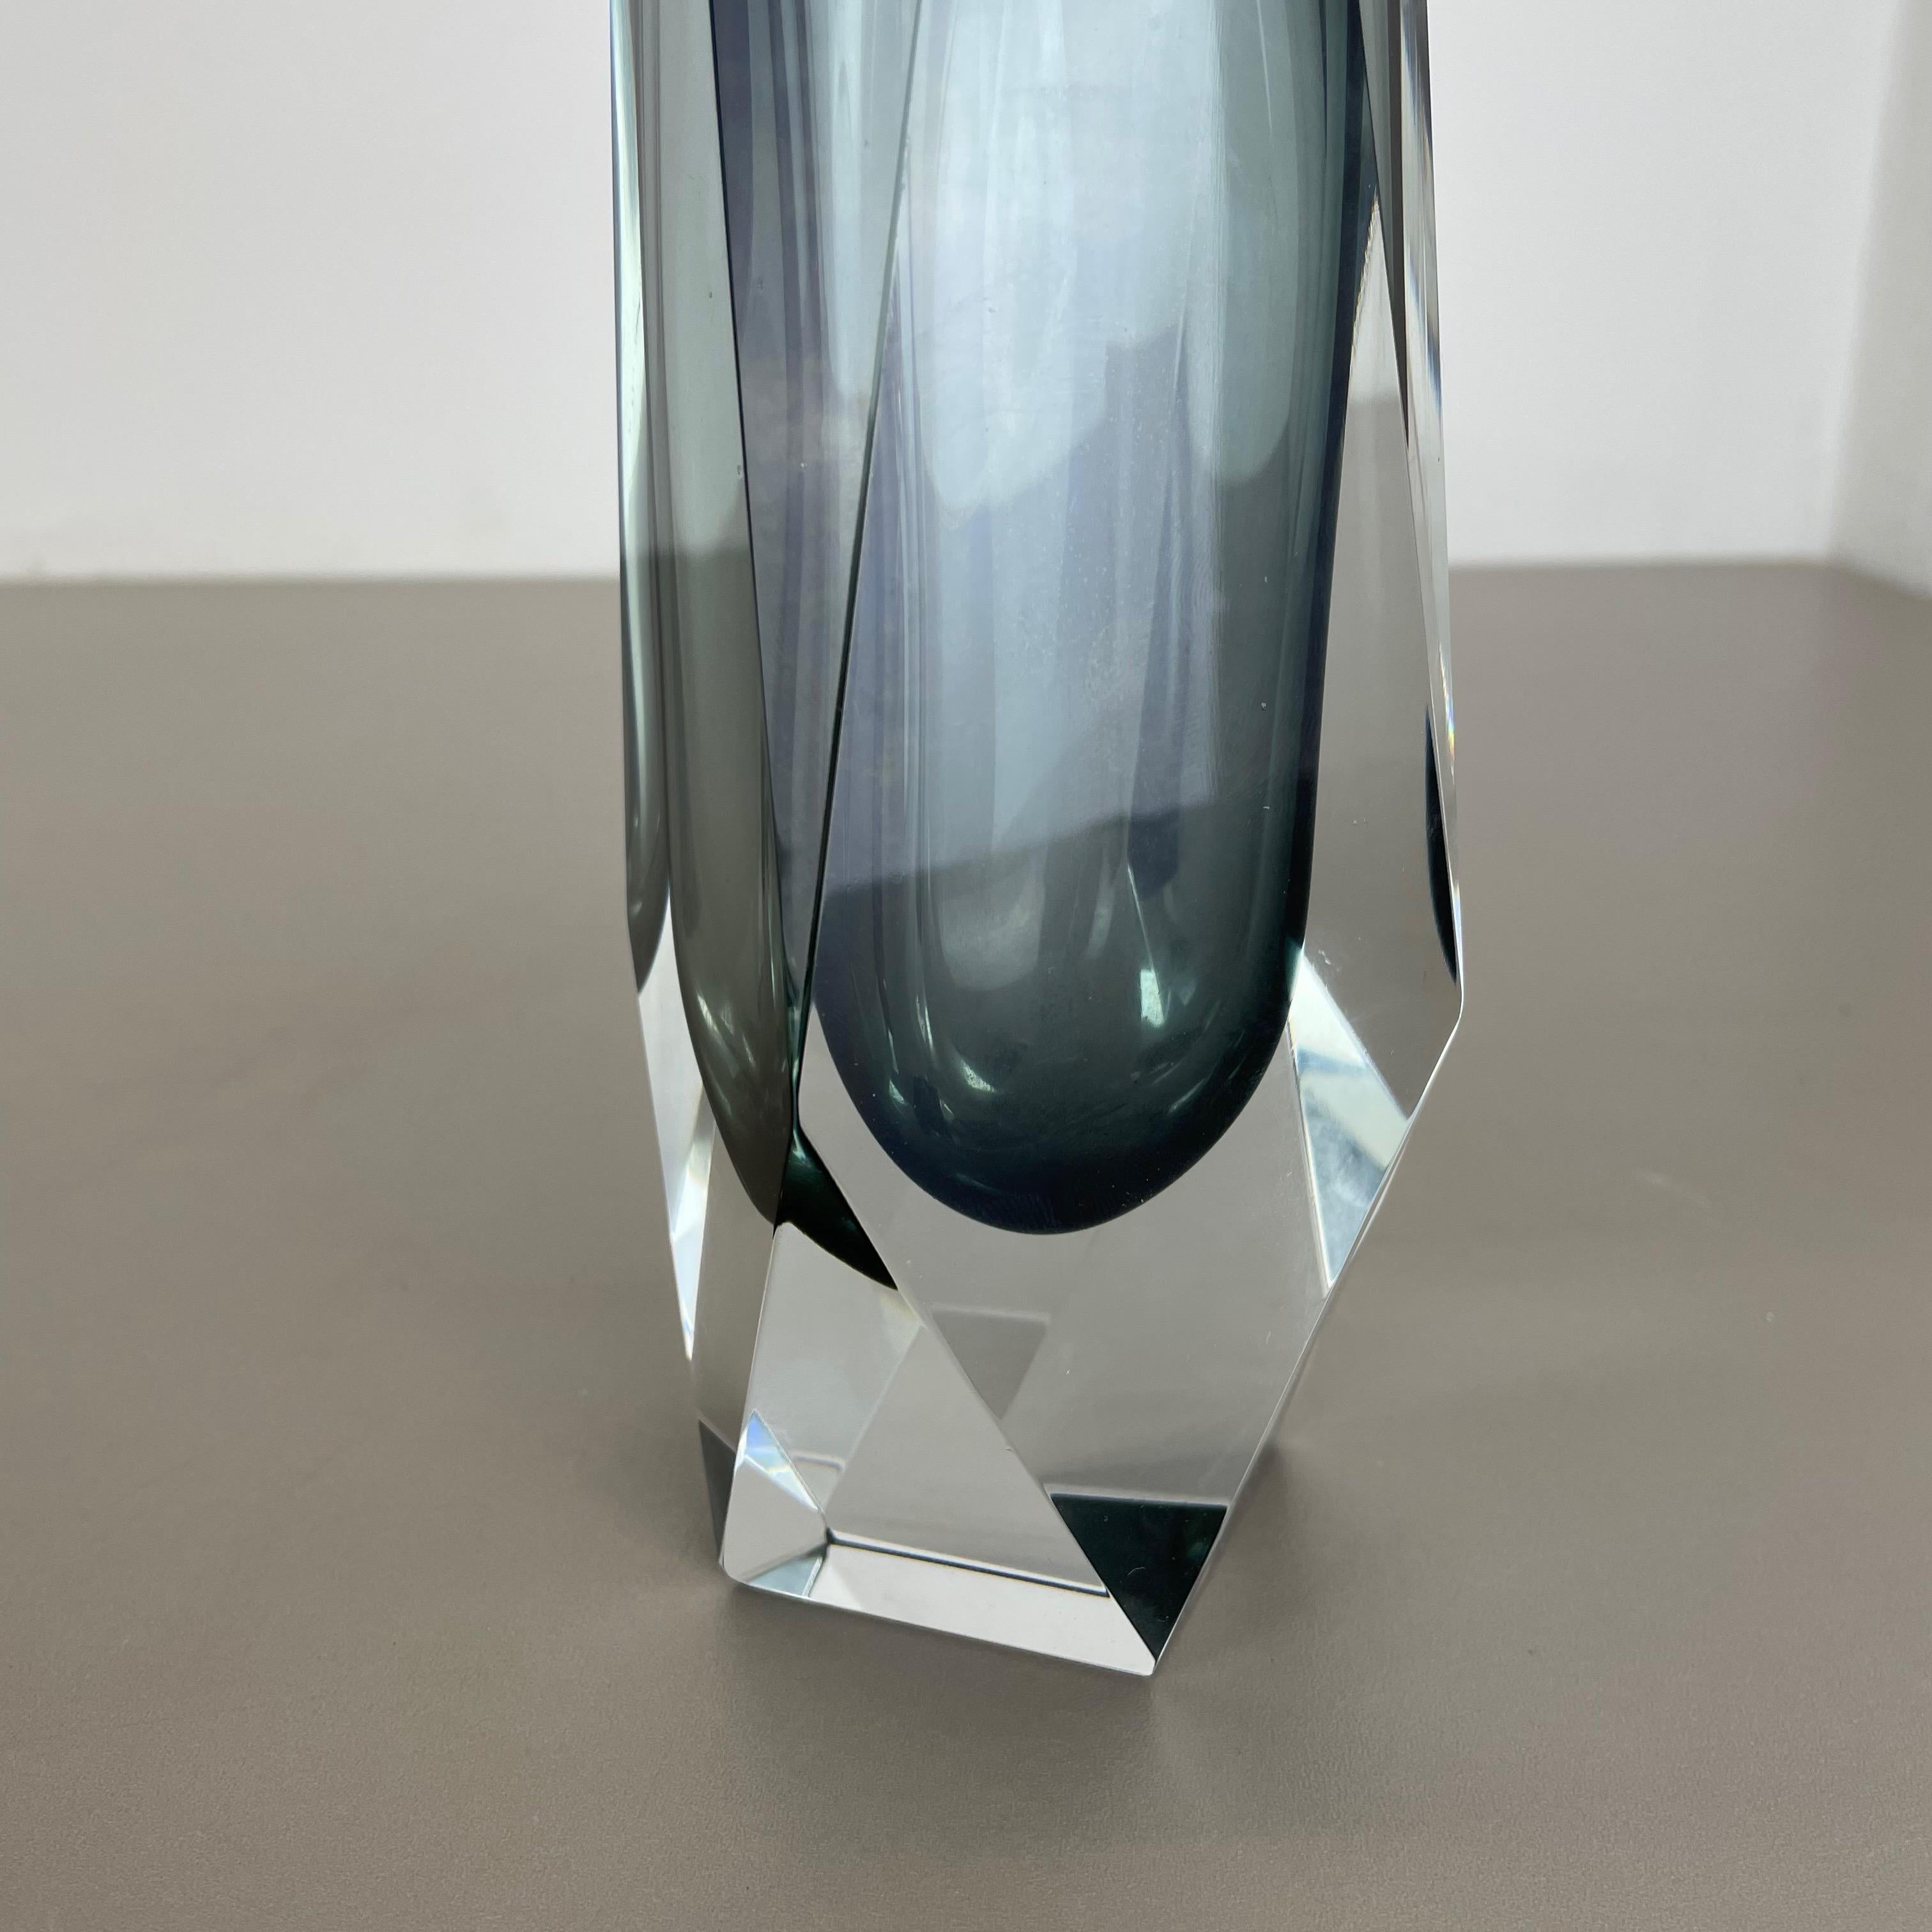 Large 25cm Grey Murano Glass Sommerso Vase by Flavio Poli Attributed, Italy 1970 In Good Condition For Sale In Kirchlengern, DE